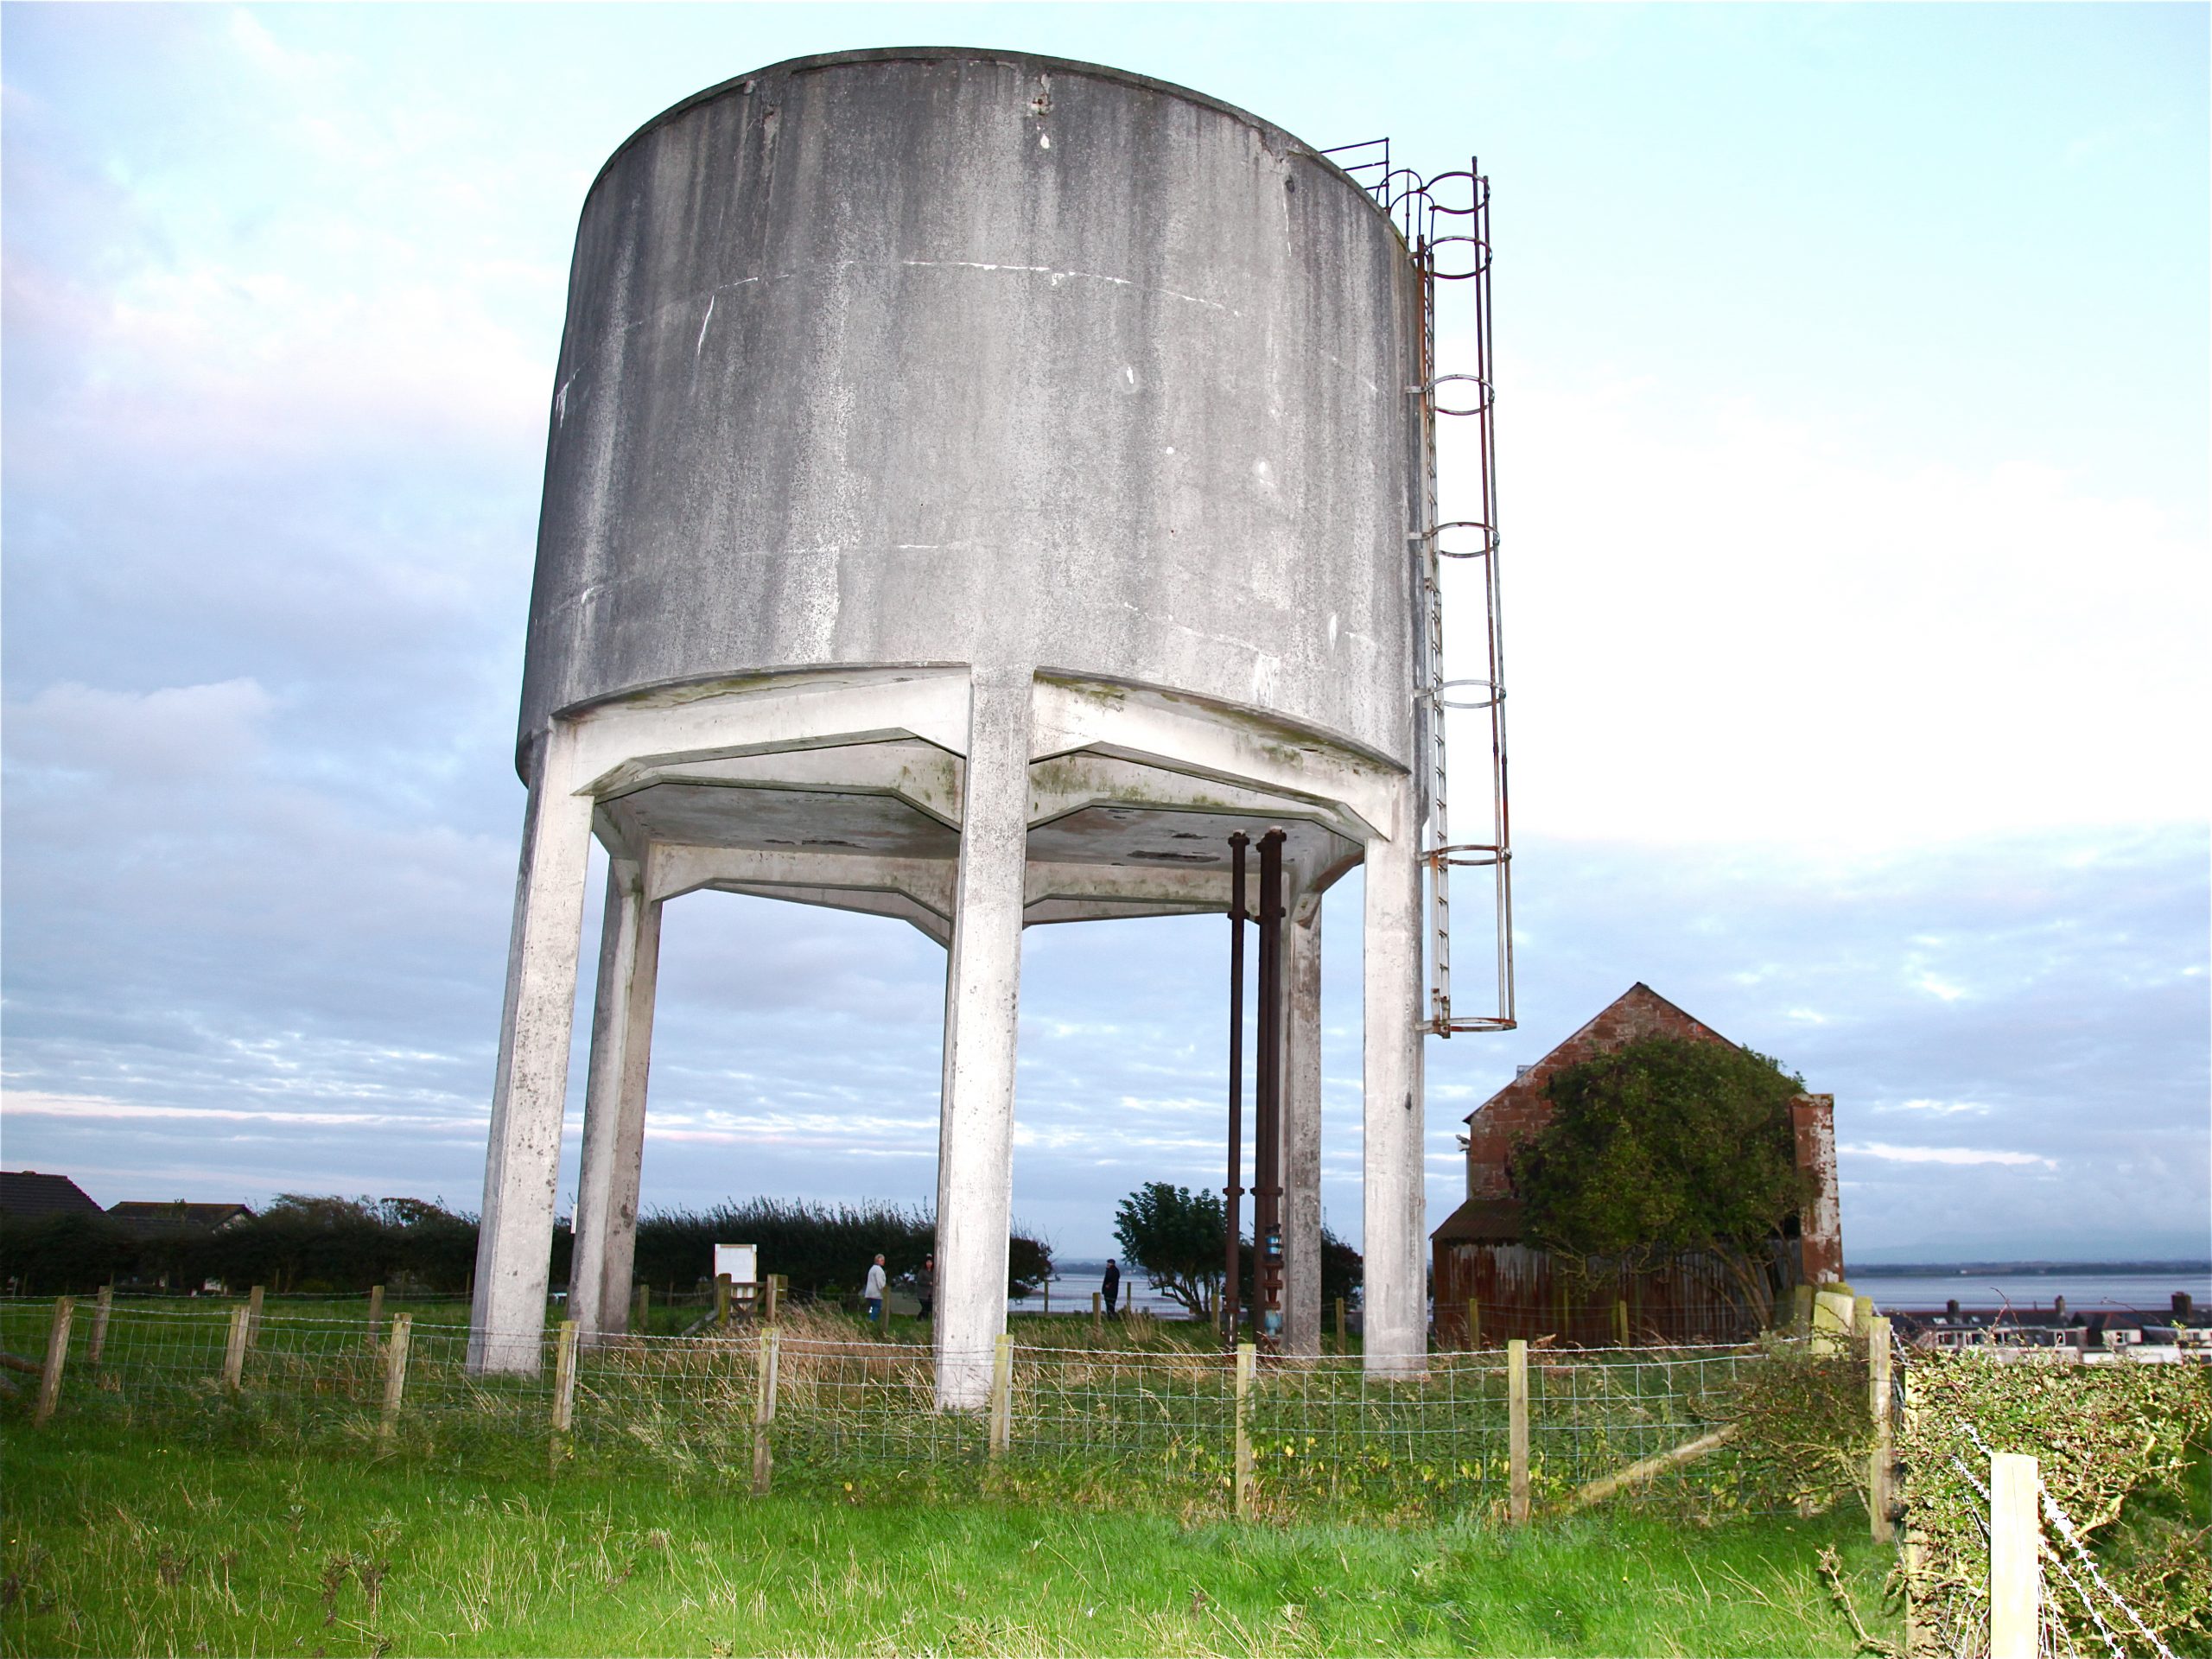 Hectic bidding for hilltop water tower